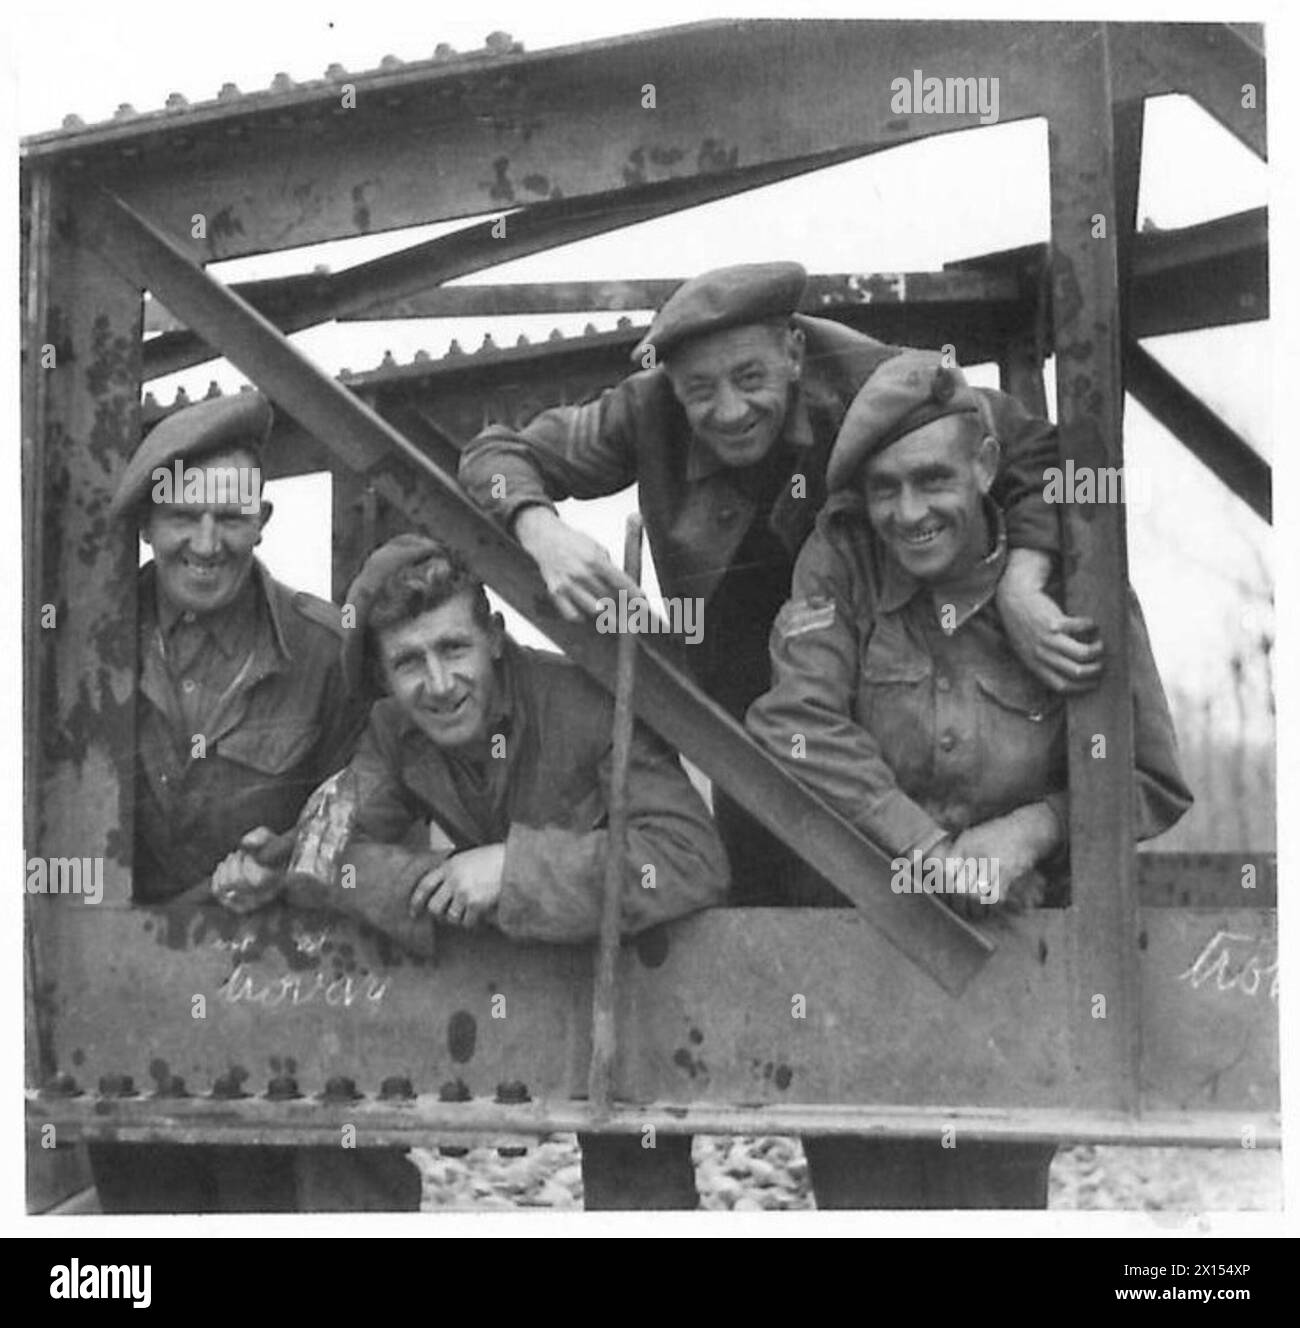 ITALY : OBSERVER STORY - Four 'Geordies' with the Unit. Left to right:- Spr. N. Anderson of Newcastle; Cpl. G. Fenwick of 1 North Junction Cottage, Percy-Main, Northumberland; Sgt. G.W. Robinson of 2 Station Cottages, Lowfell, Gateshead-on-Tyne. Sgt. J. Jackson of 6 Lucy Street, Stanley, Co.Durham British Army Stock Photo